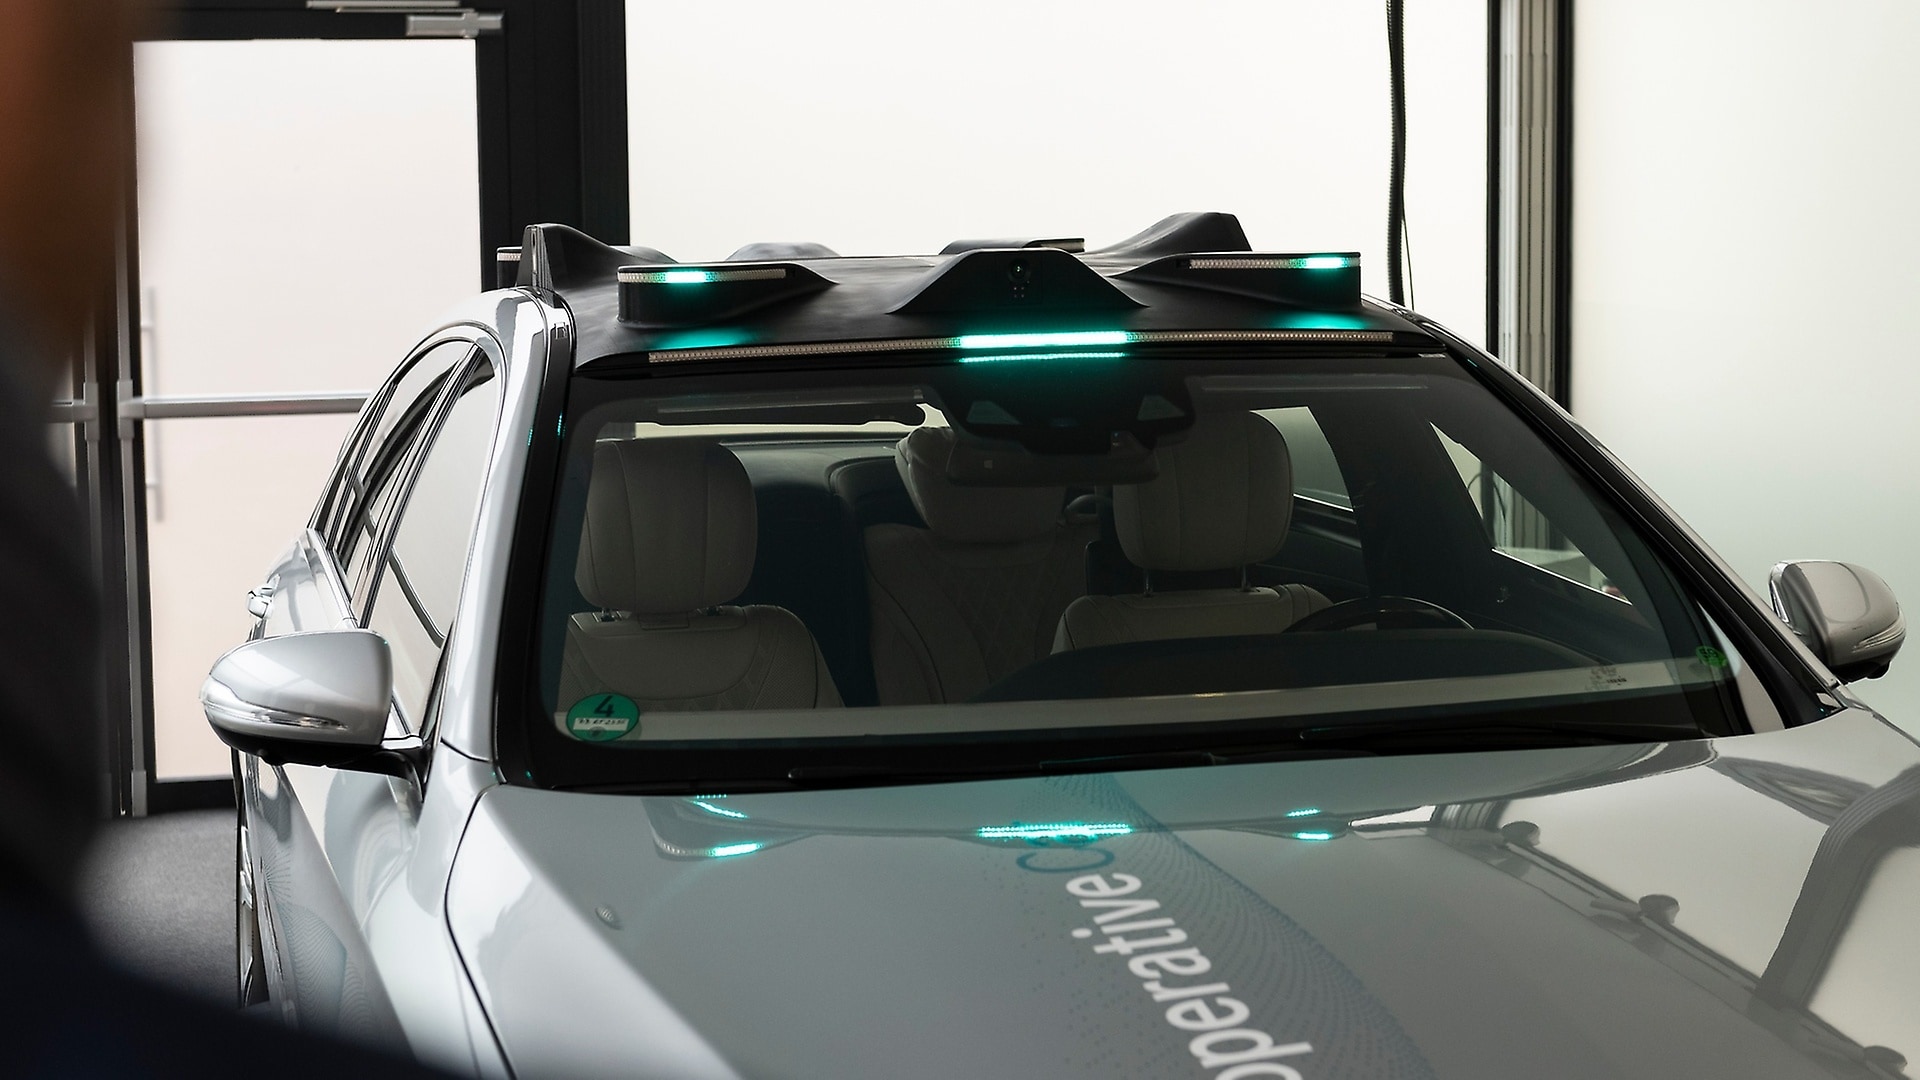 Lamps on the roof provide information about the next actions that the vehicle is going to perform. 